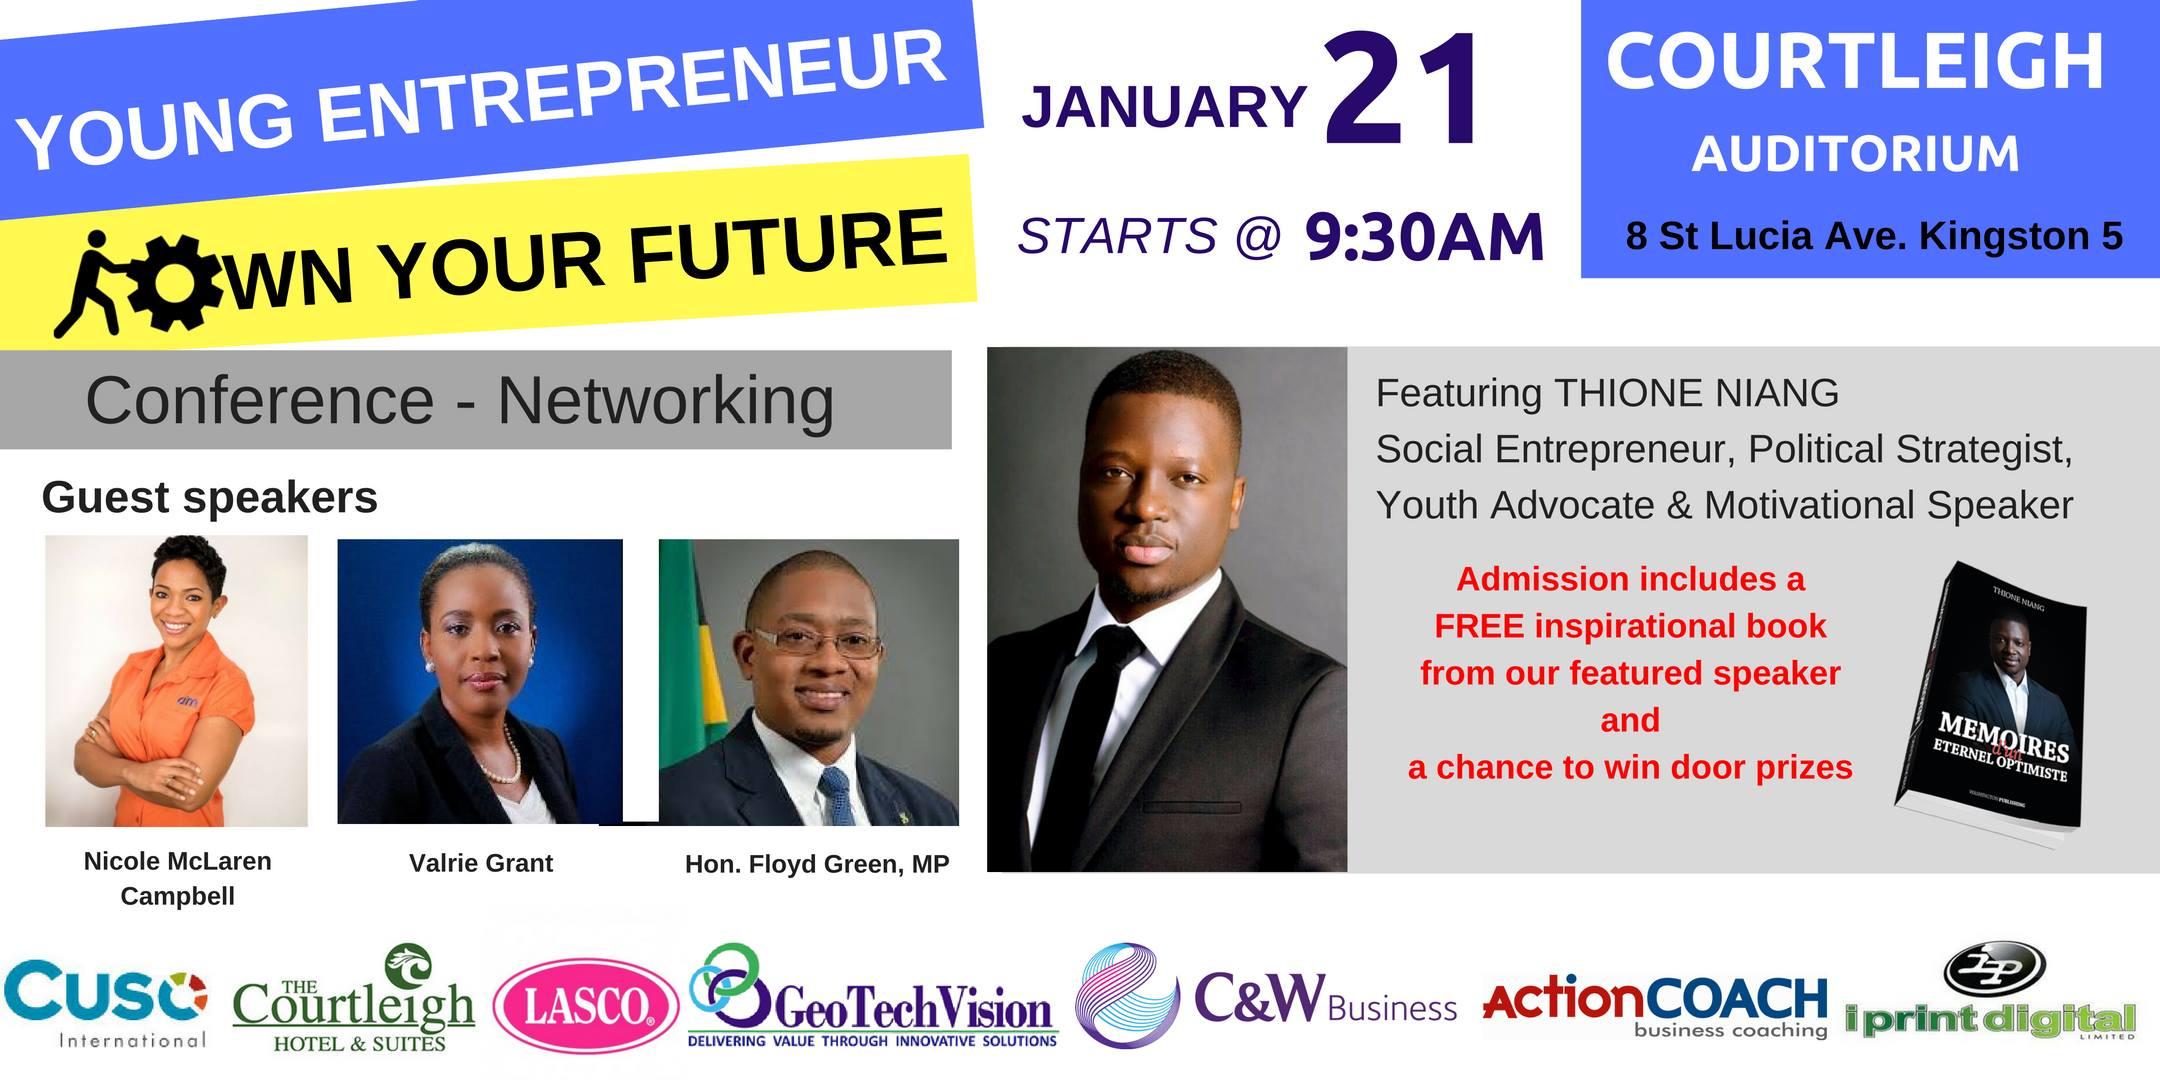 Young Entrepreneur: Own Your Future